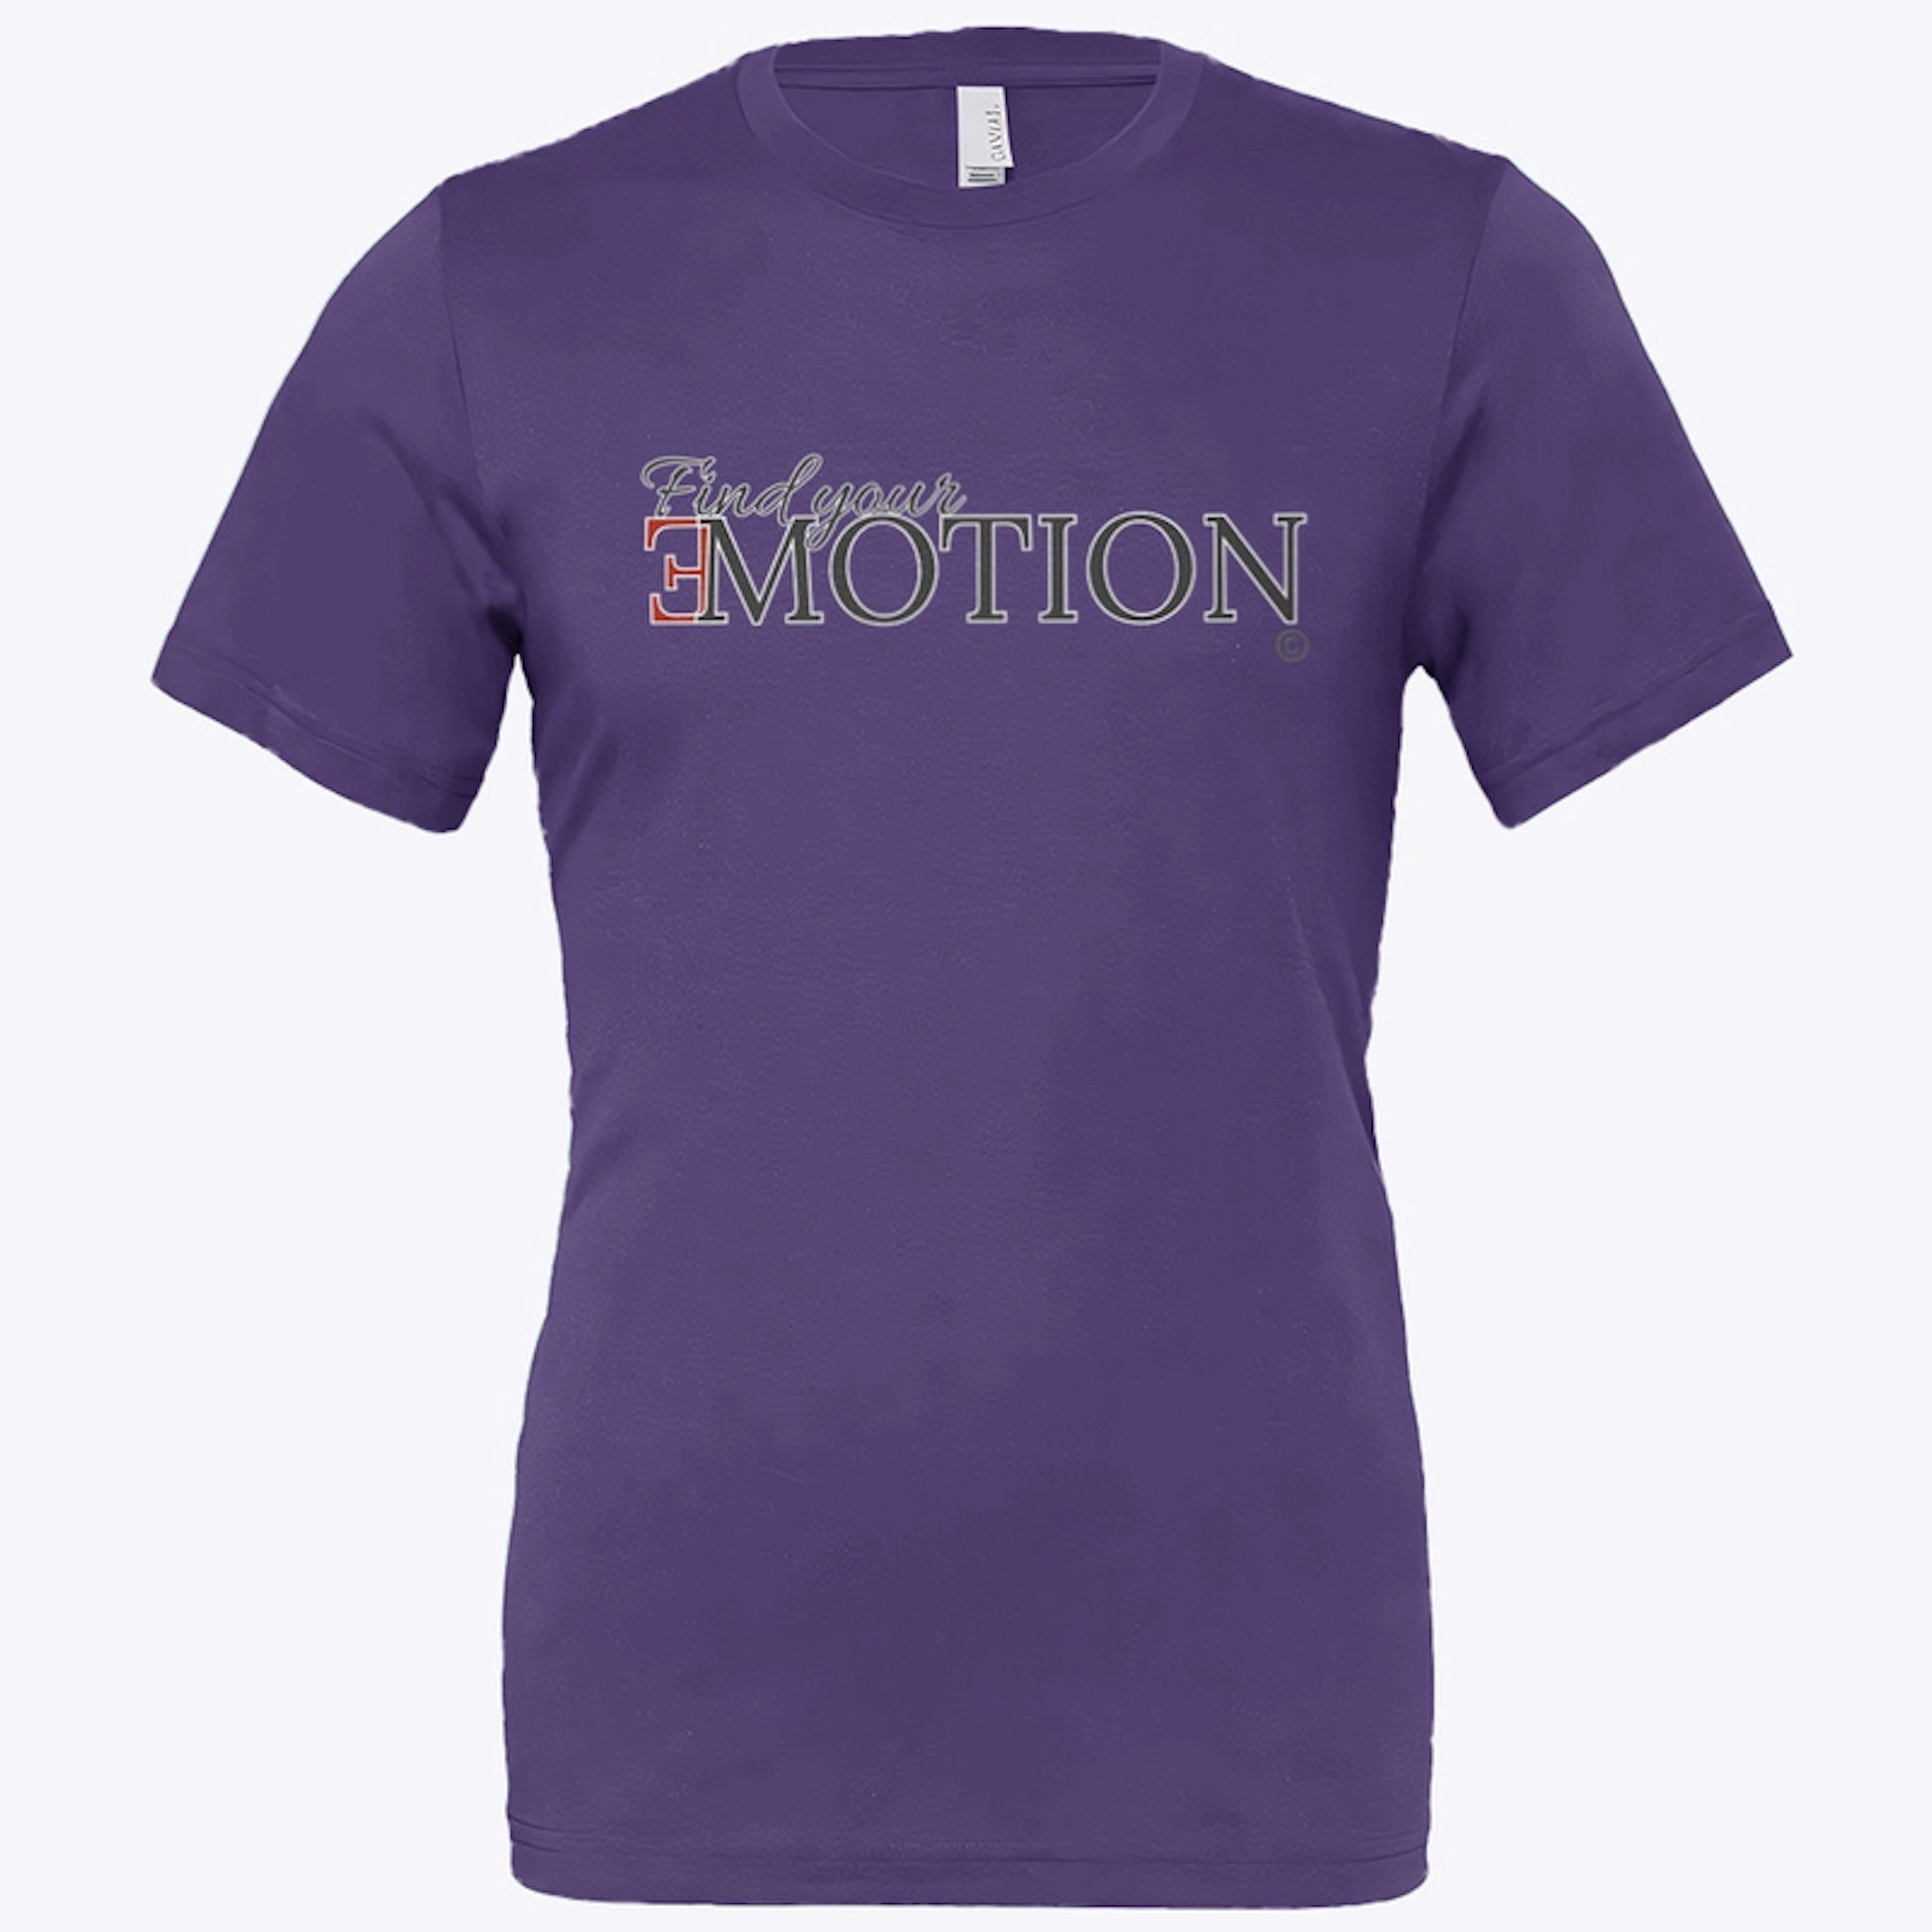 Find your motion purple tee